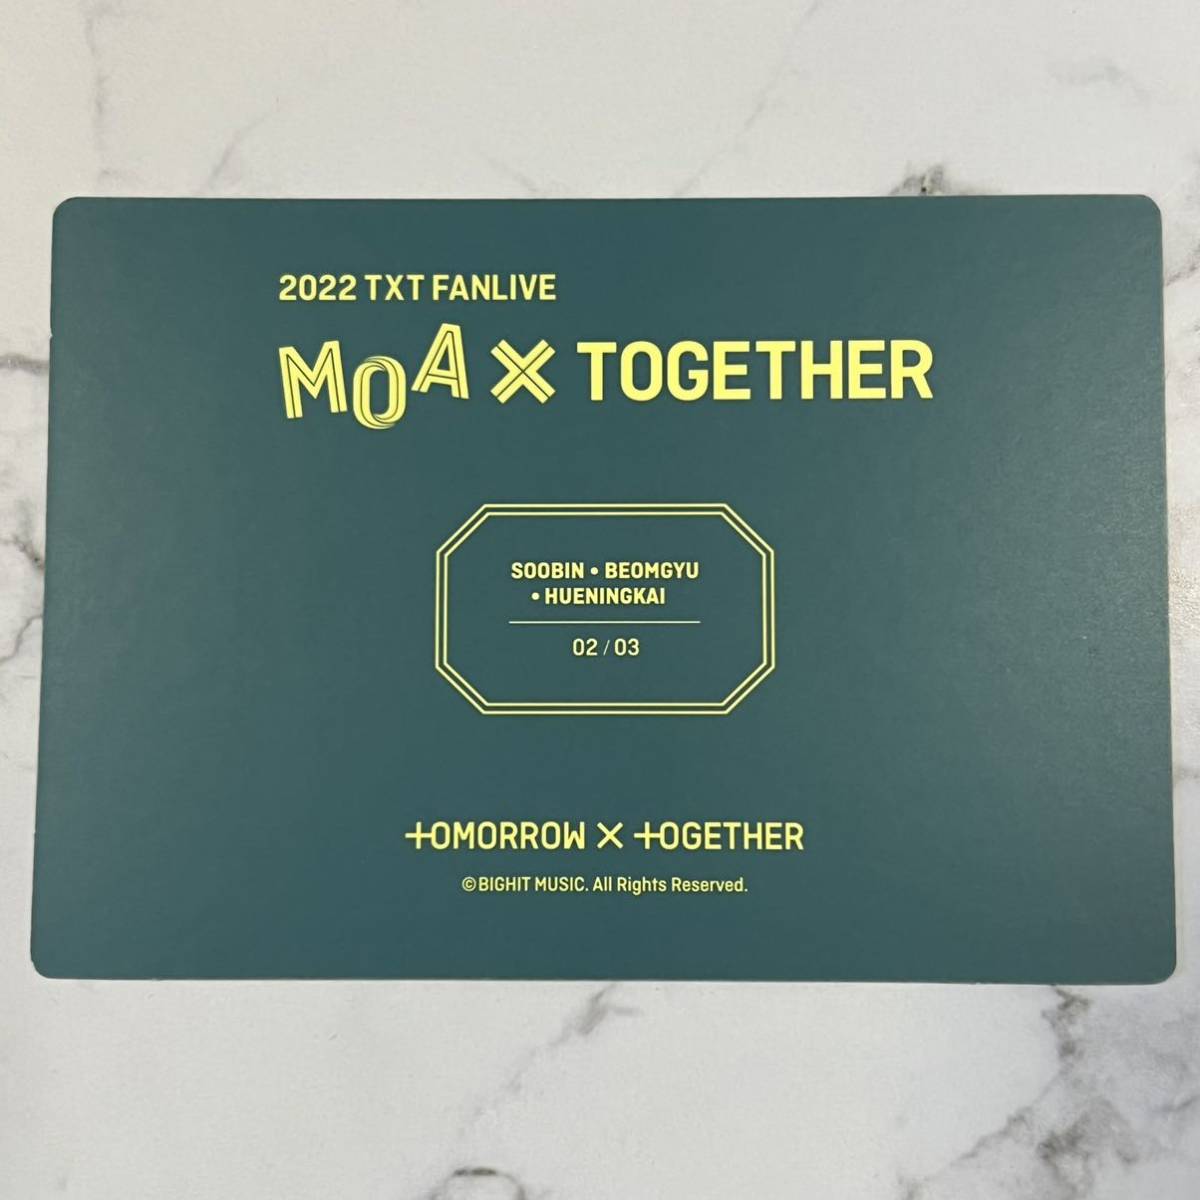 TOMORROW X TOGETHER TXT トゥバ MOA X TOGETHER 公式 グッズ ミニ